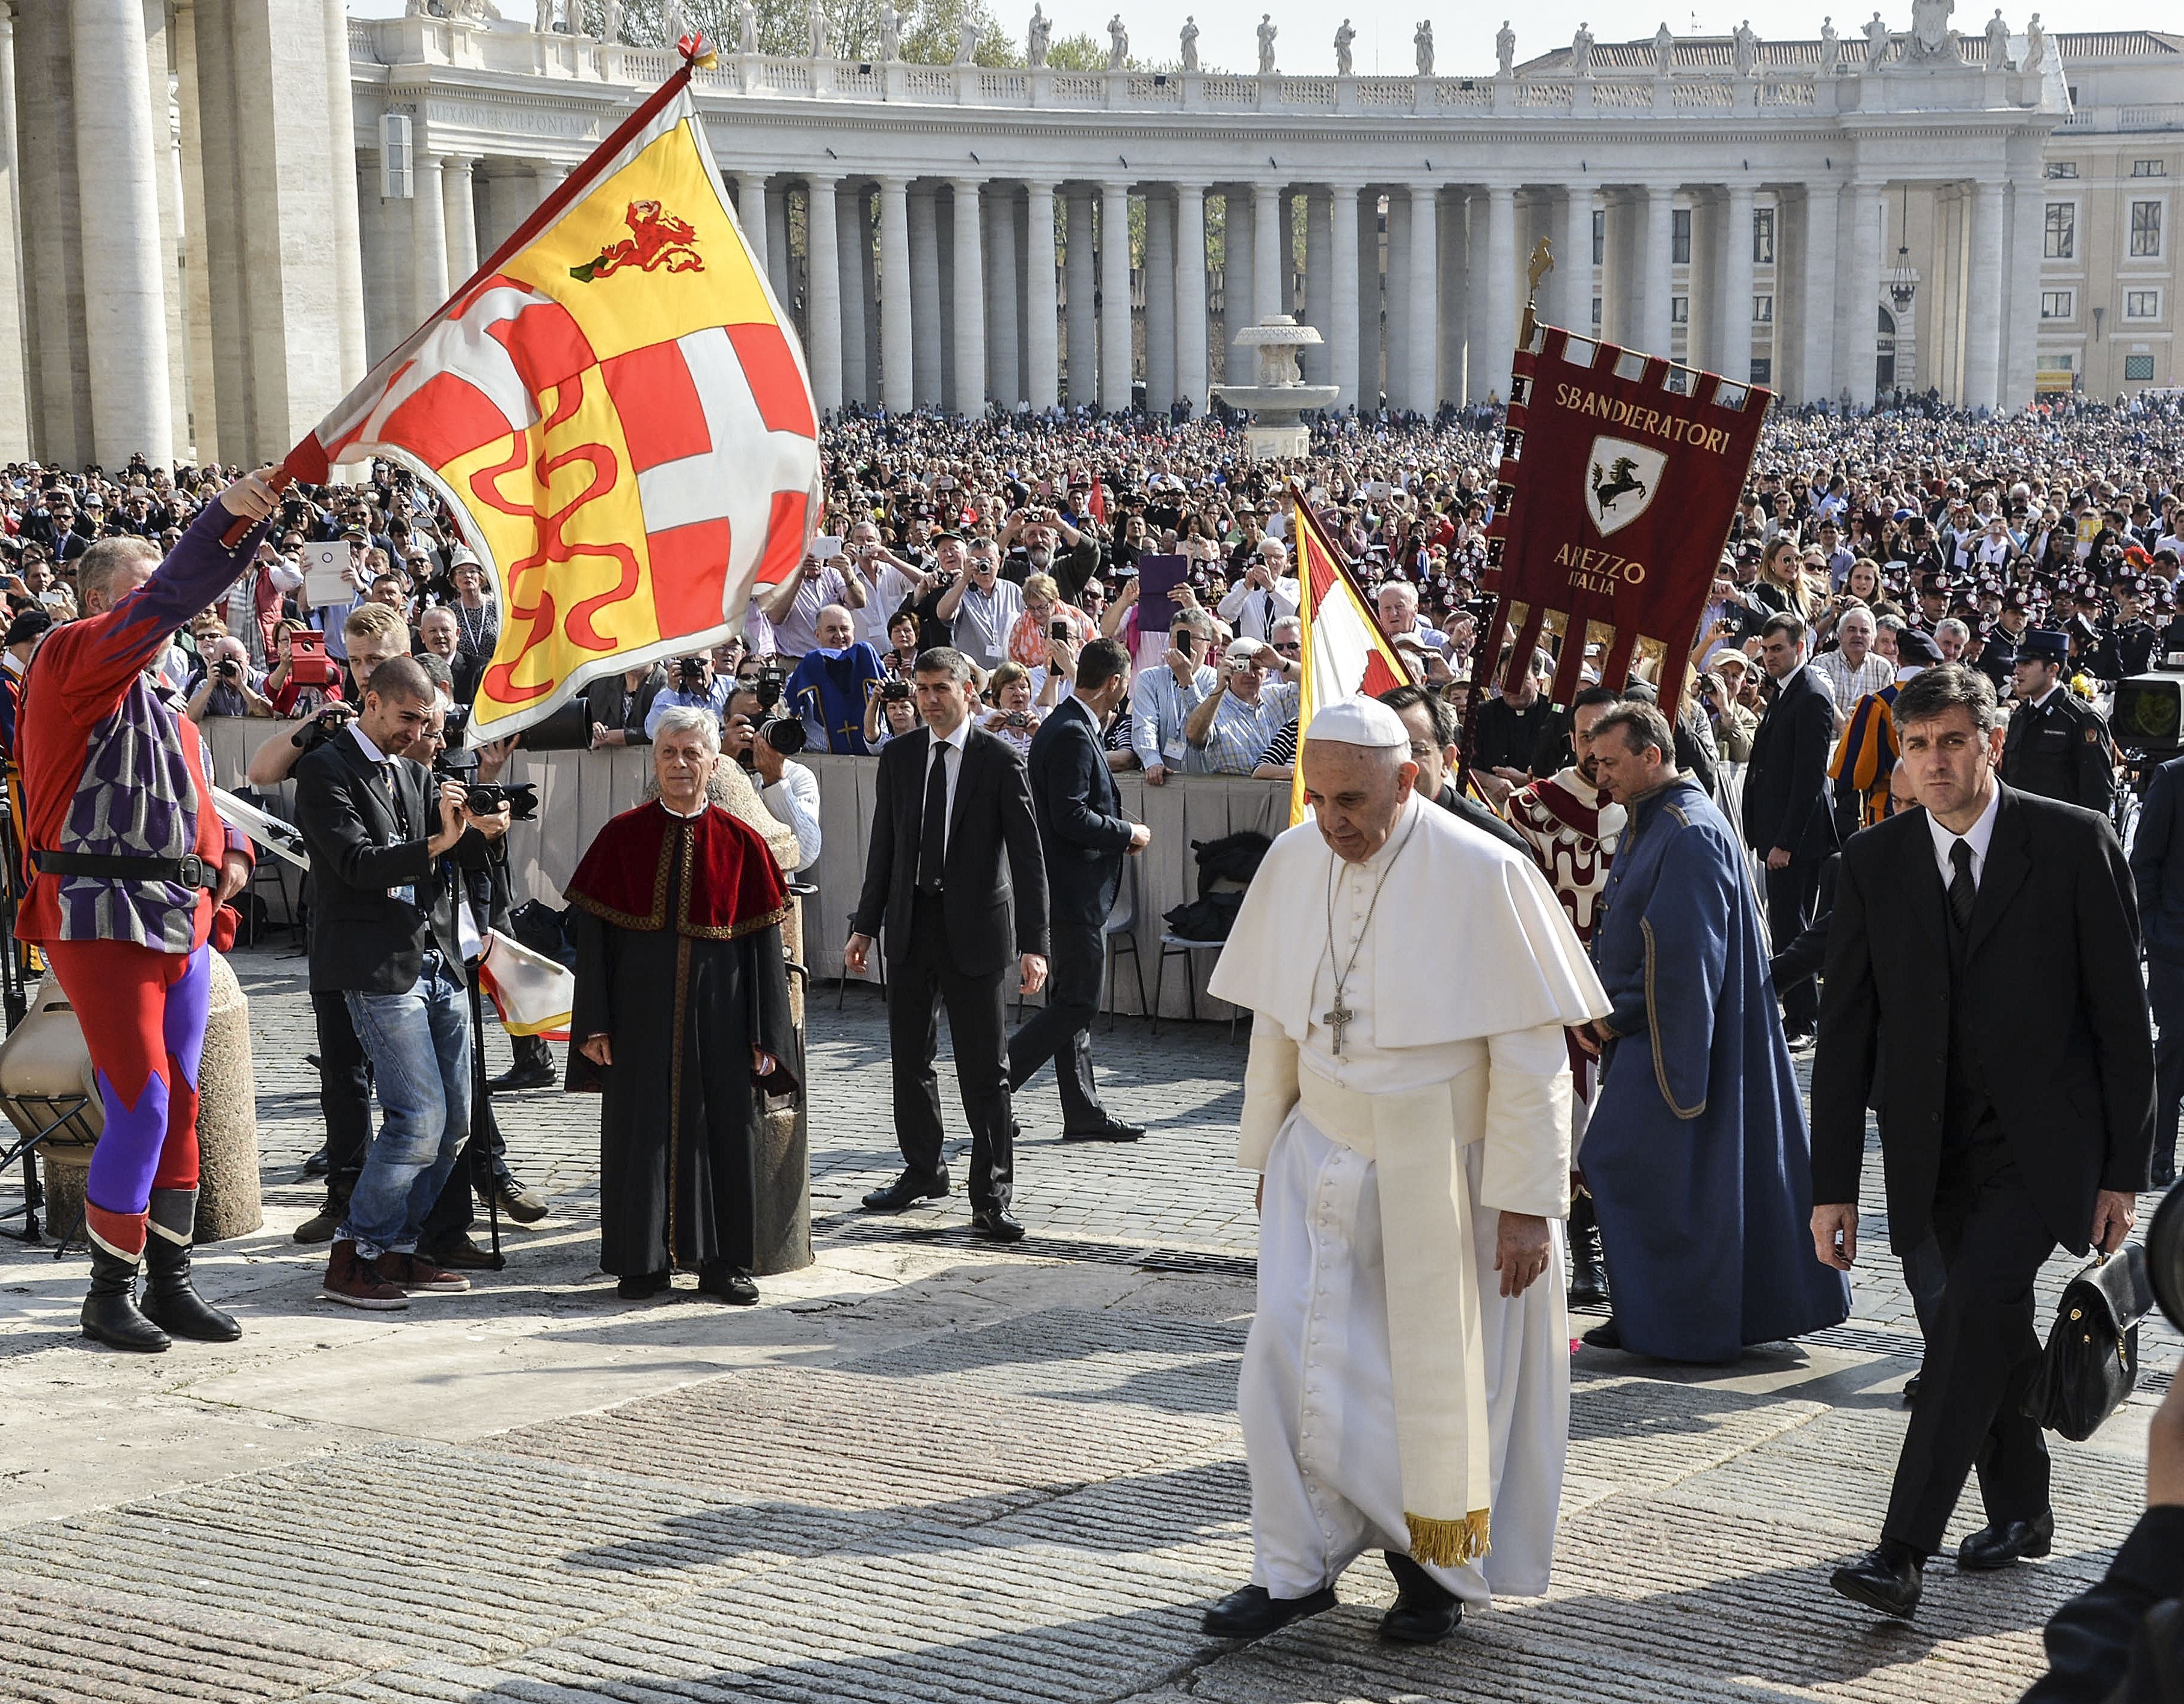 Pope Francis arrives at St. Peter's square on April 15, 2014 to lead his weekly general audience in Vatican City, Vatican on April 15, 2015. (Baris Seckin&mdash;Anadolu Agency/Getty Images)